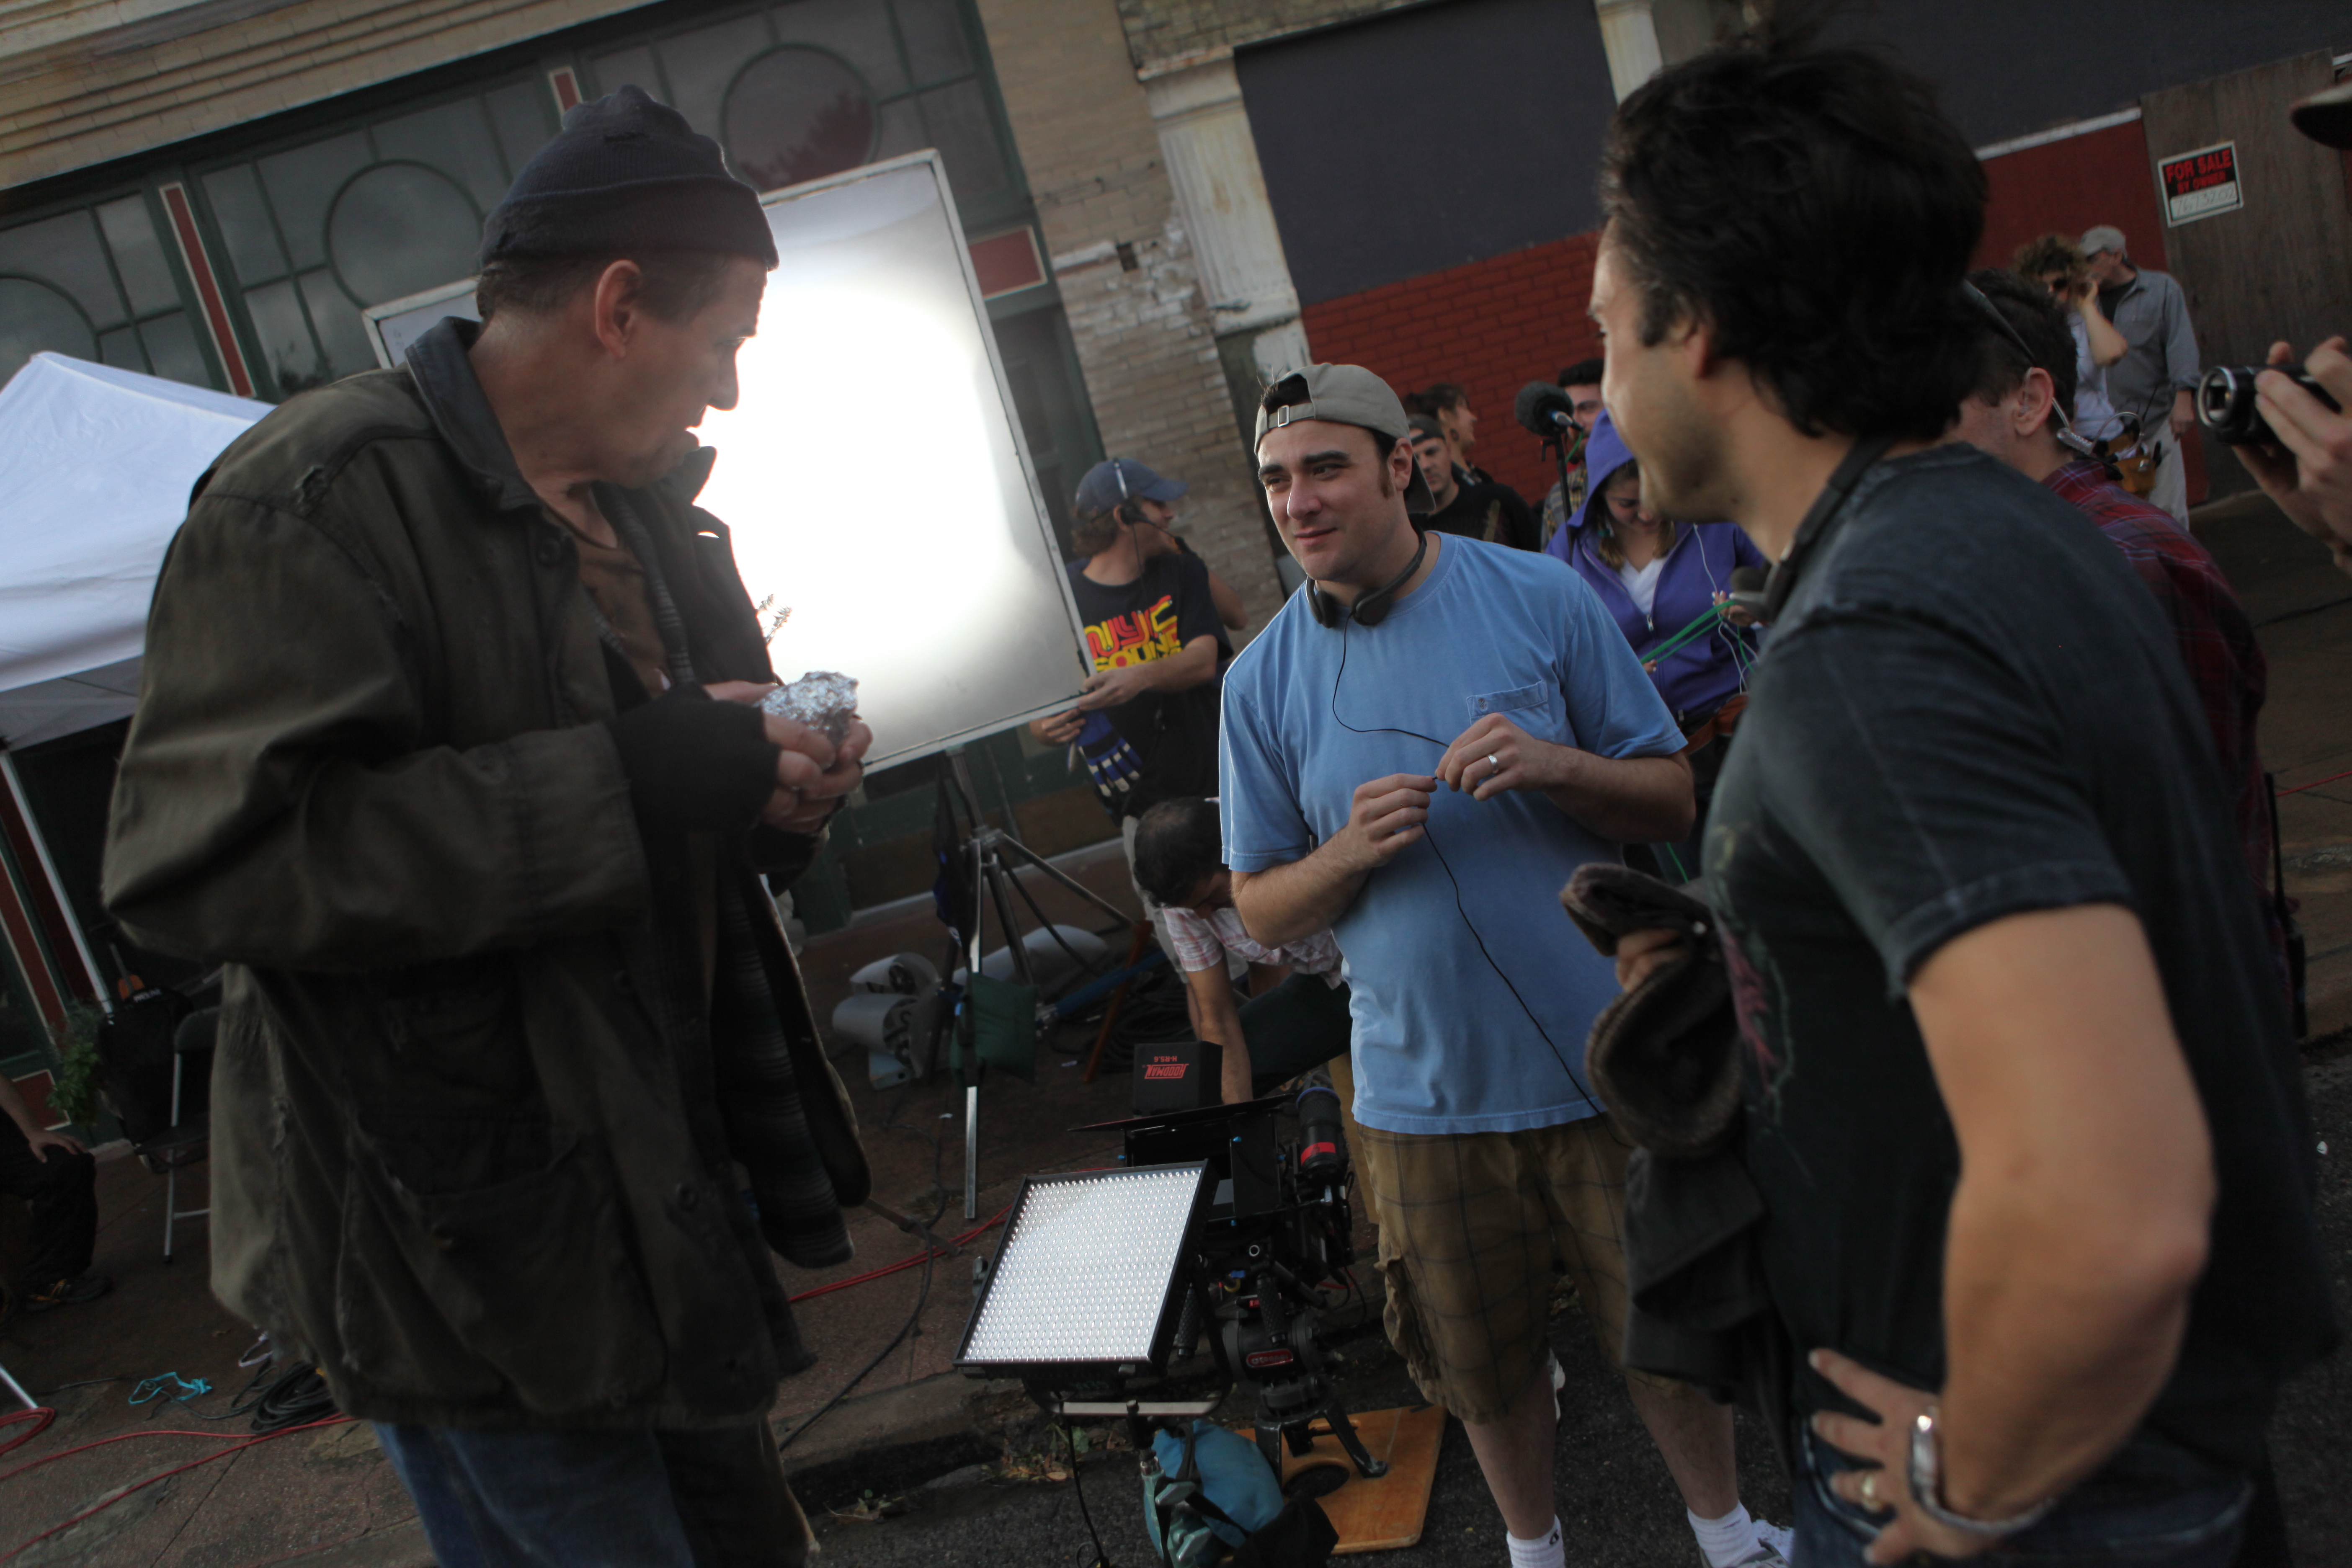 L-R: Actor Ed Neal (The Texas Chain Saw Massacre, Future Kill), co-directors Duane Graves and Justin Meeks on set of the horror feature BUTCHER BOYS, November, 2010